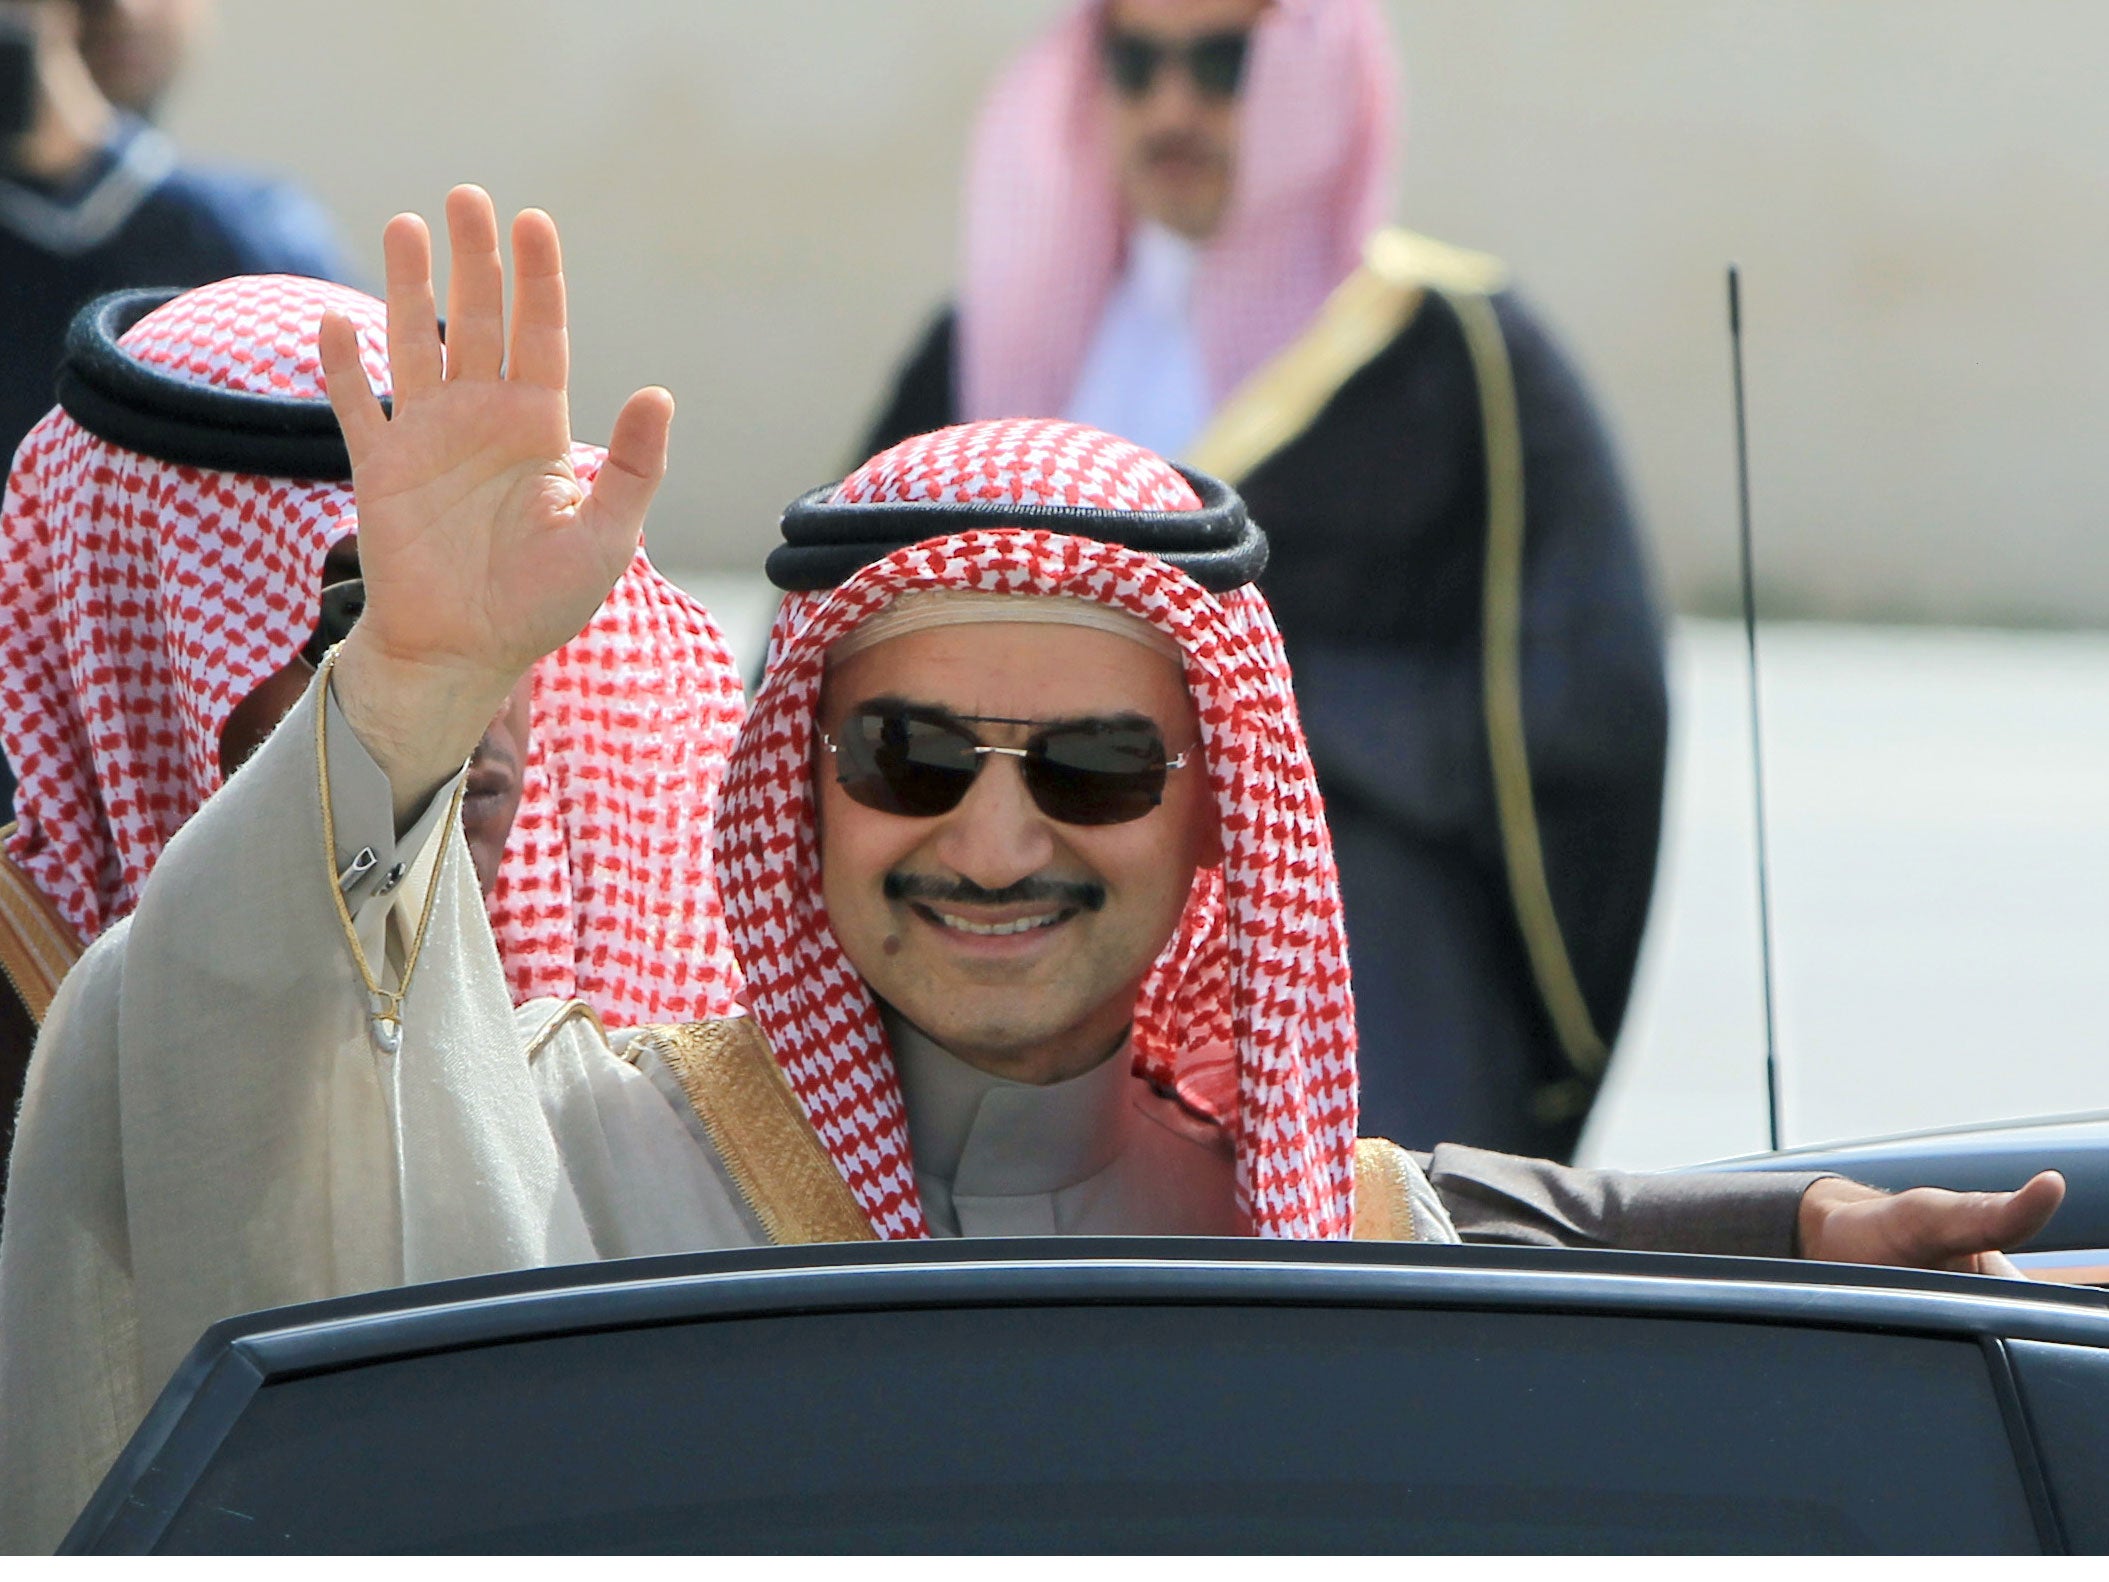 Saudi prince Al-Waleed bin Talal now owns about 4 million shares in Twitter.